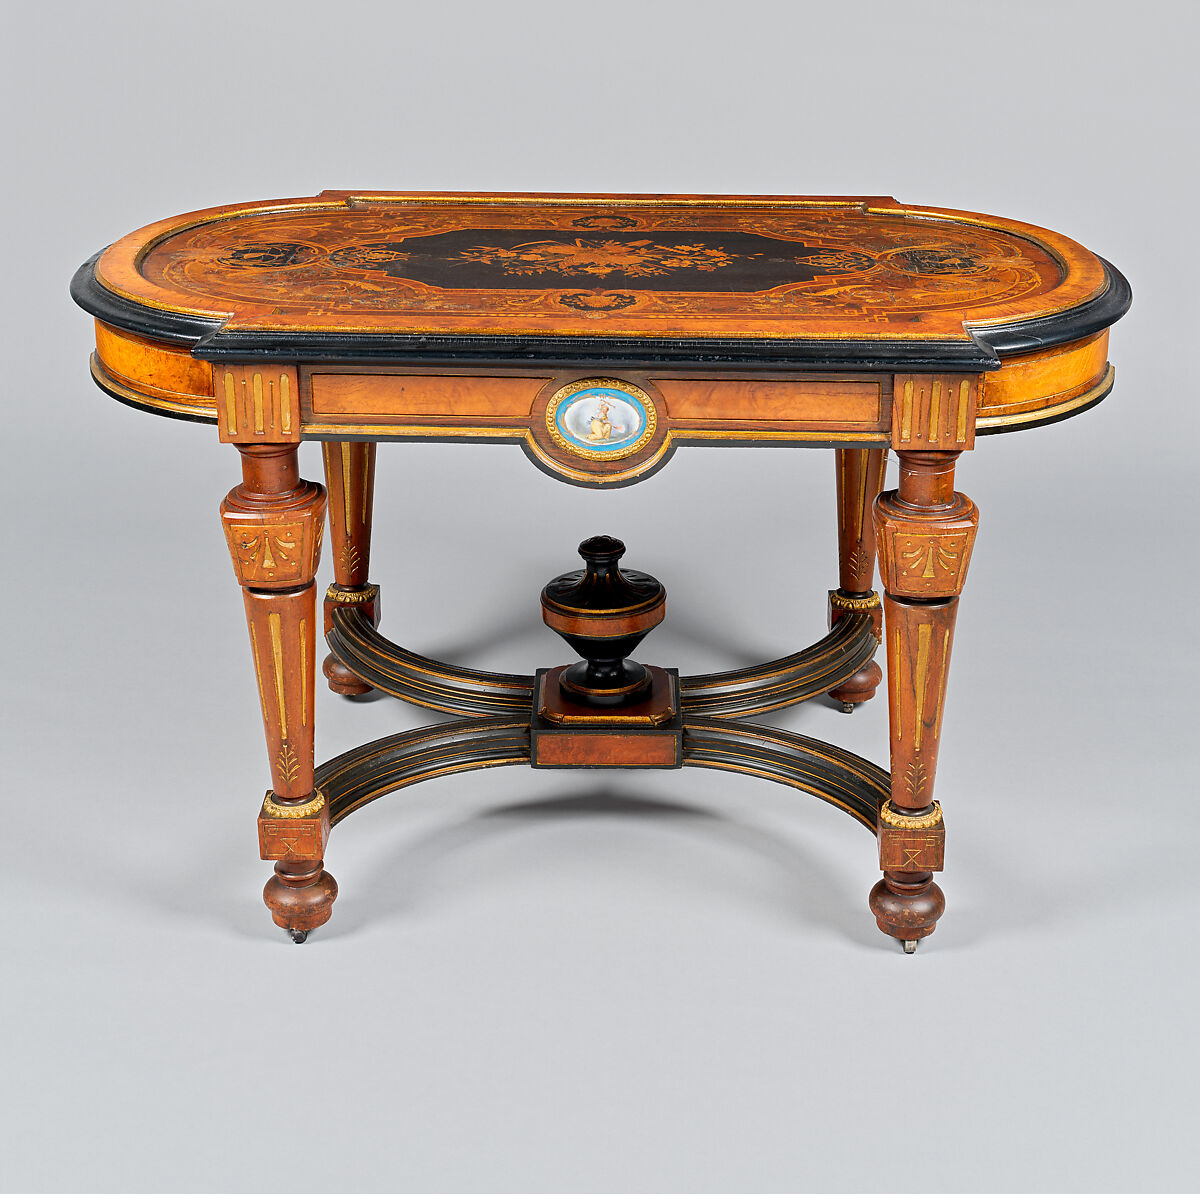 Center Table, Walnut with inlays of other woods, gilding, gilt bronze mounts, and porcelain plaques., American 